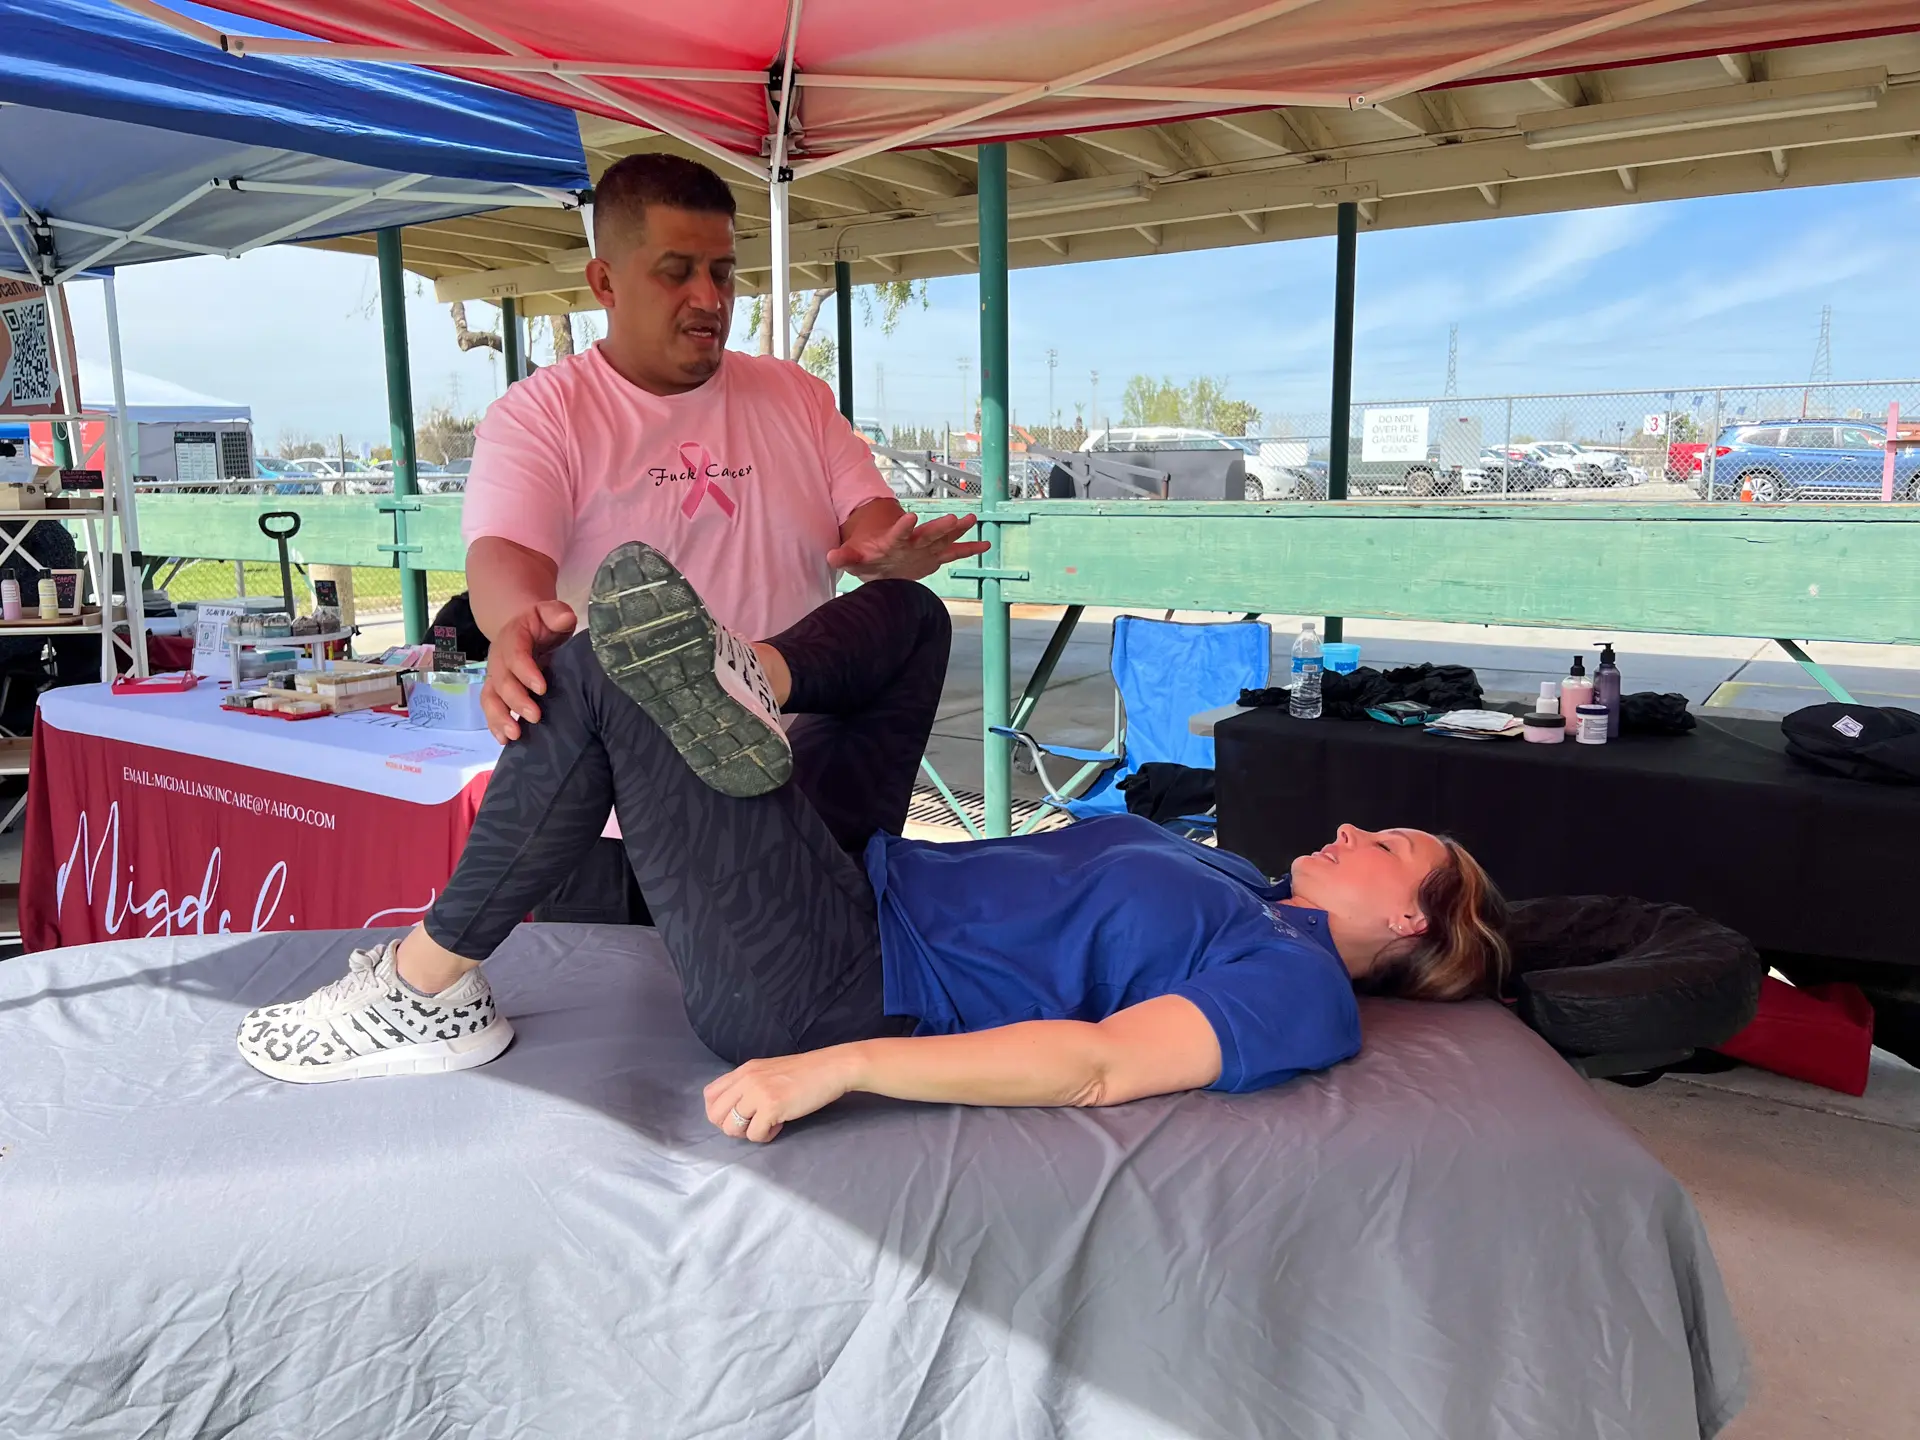 A member of the Kern County Cancer Foundation getting a chiropractic adjustment on a bed at Teaming Up Against Cancer 2023